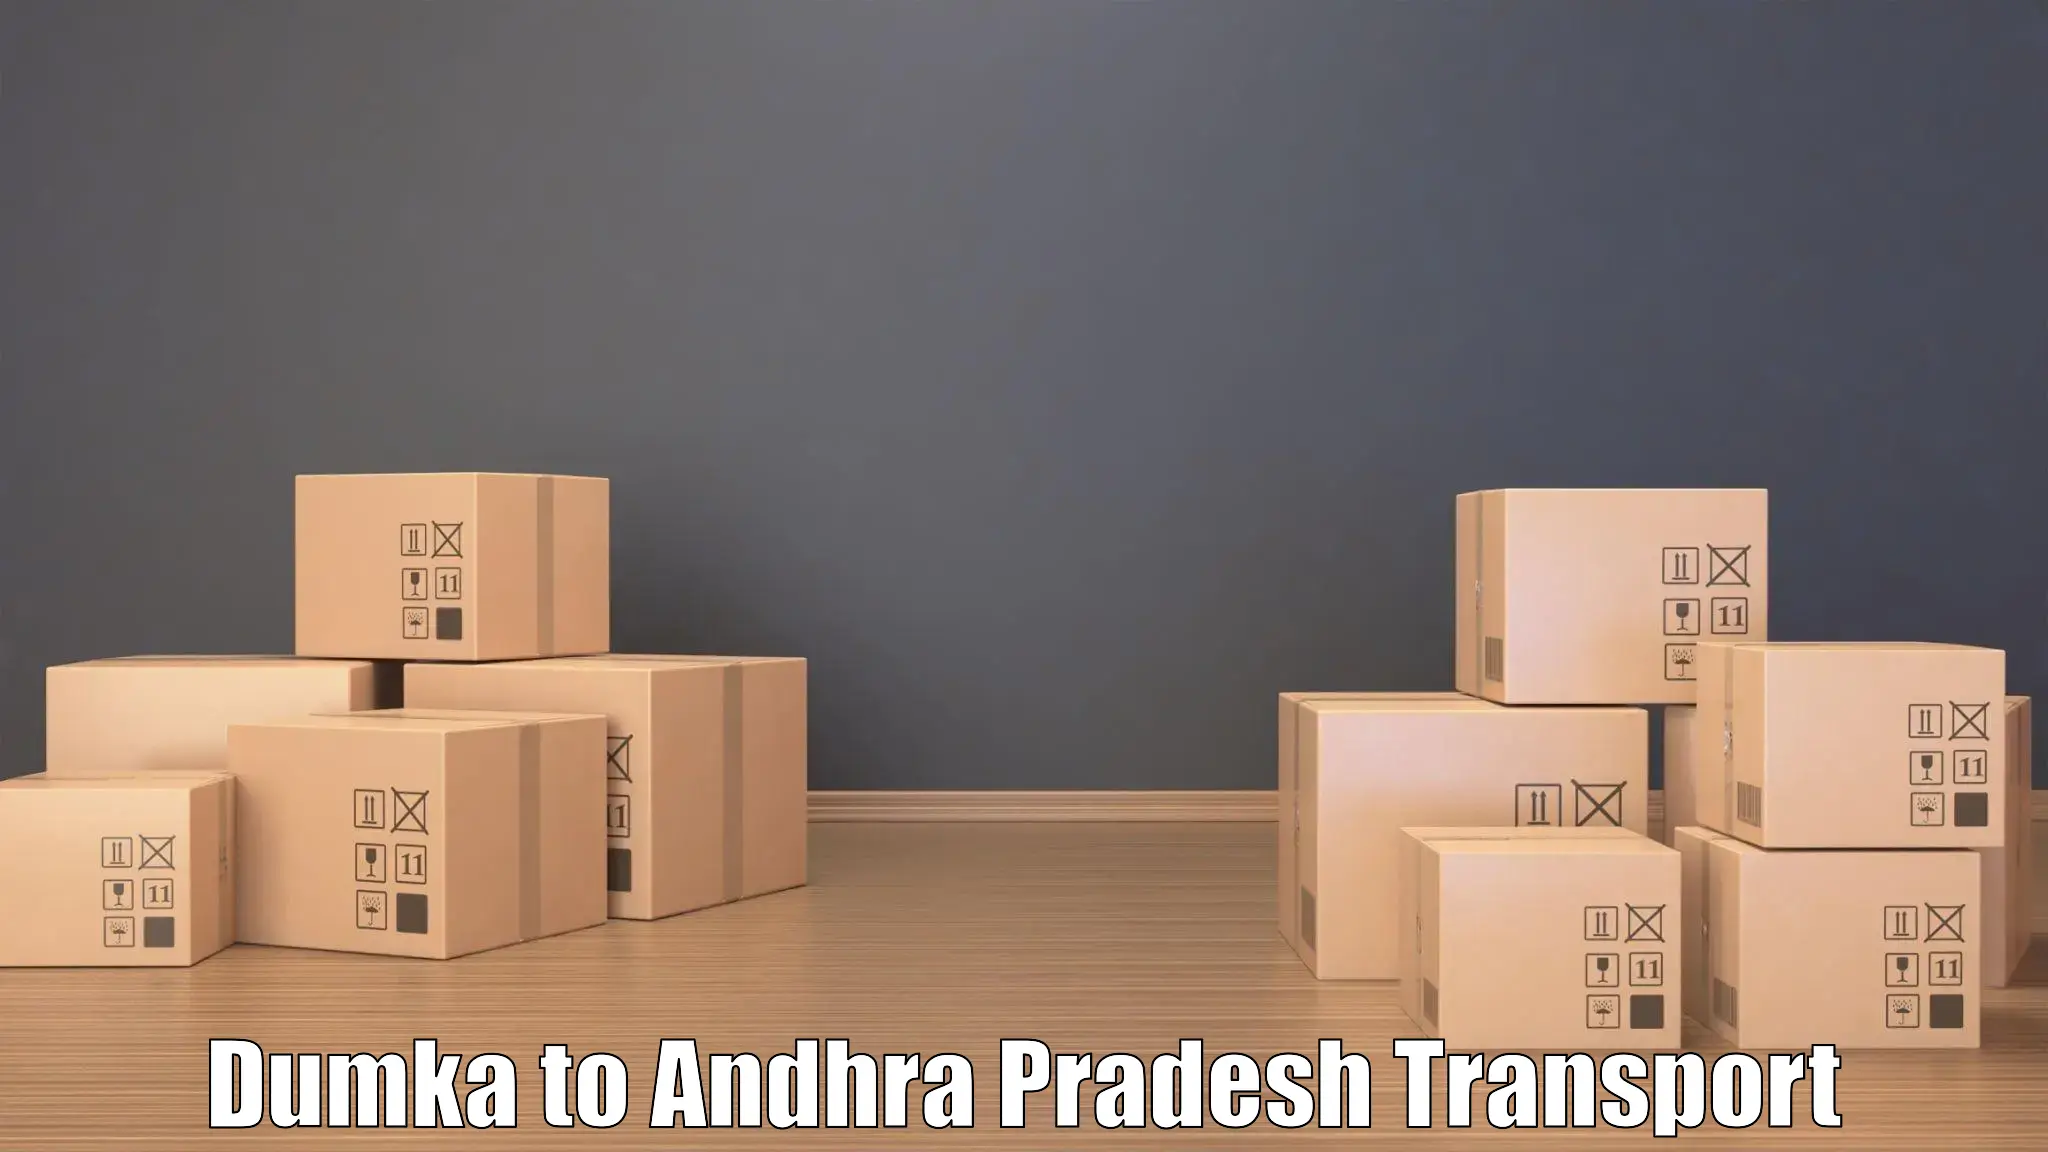 Goods delivery service Dumka to Hindupur